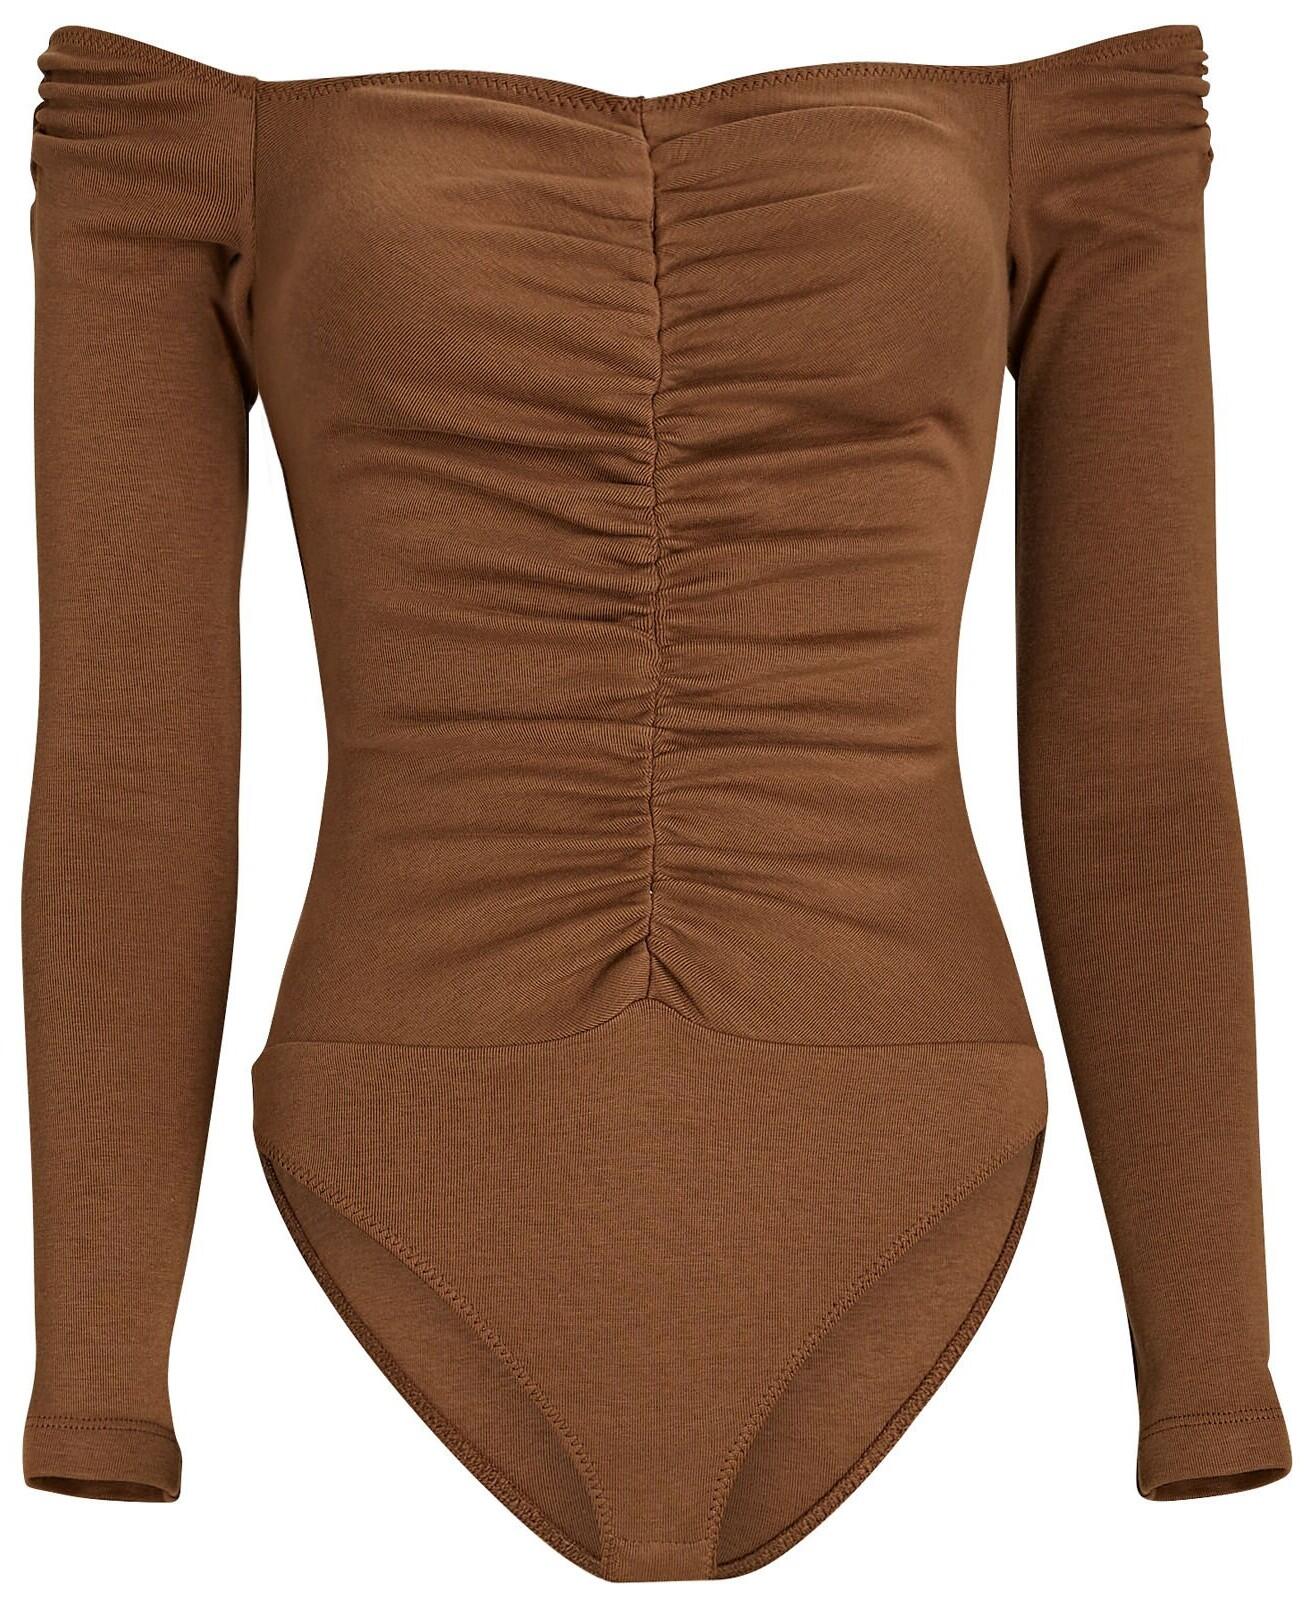 Bodysuit (Brown Ruched) | style